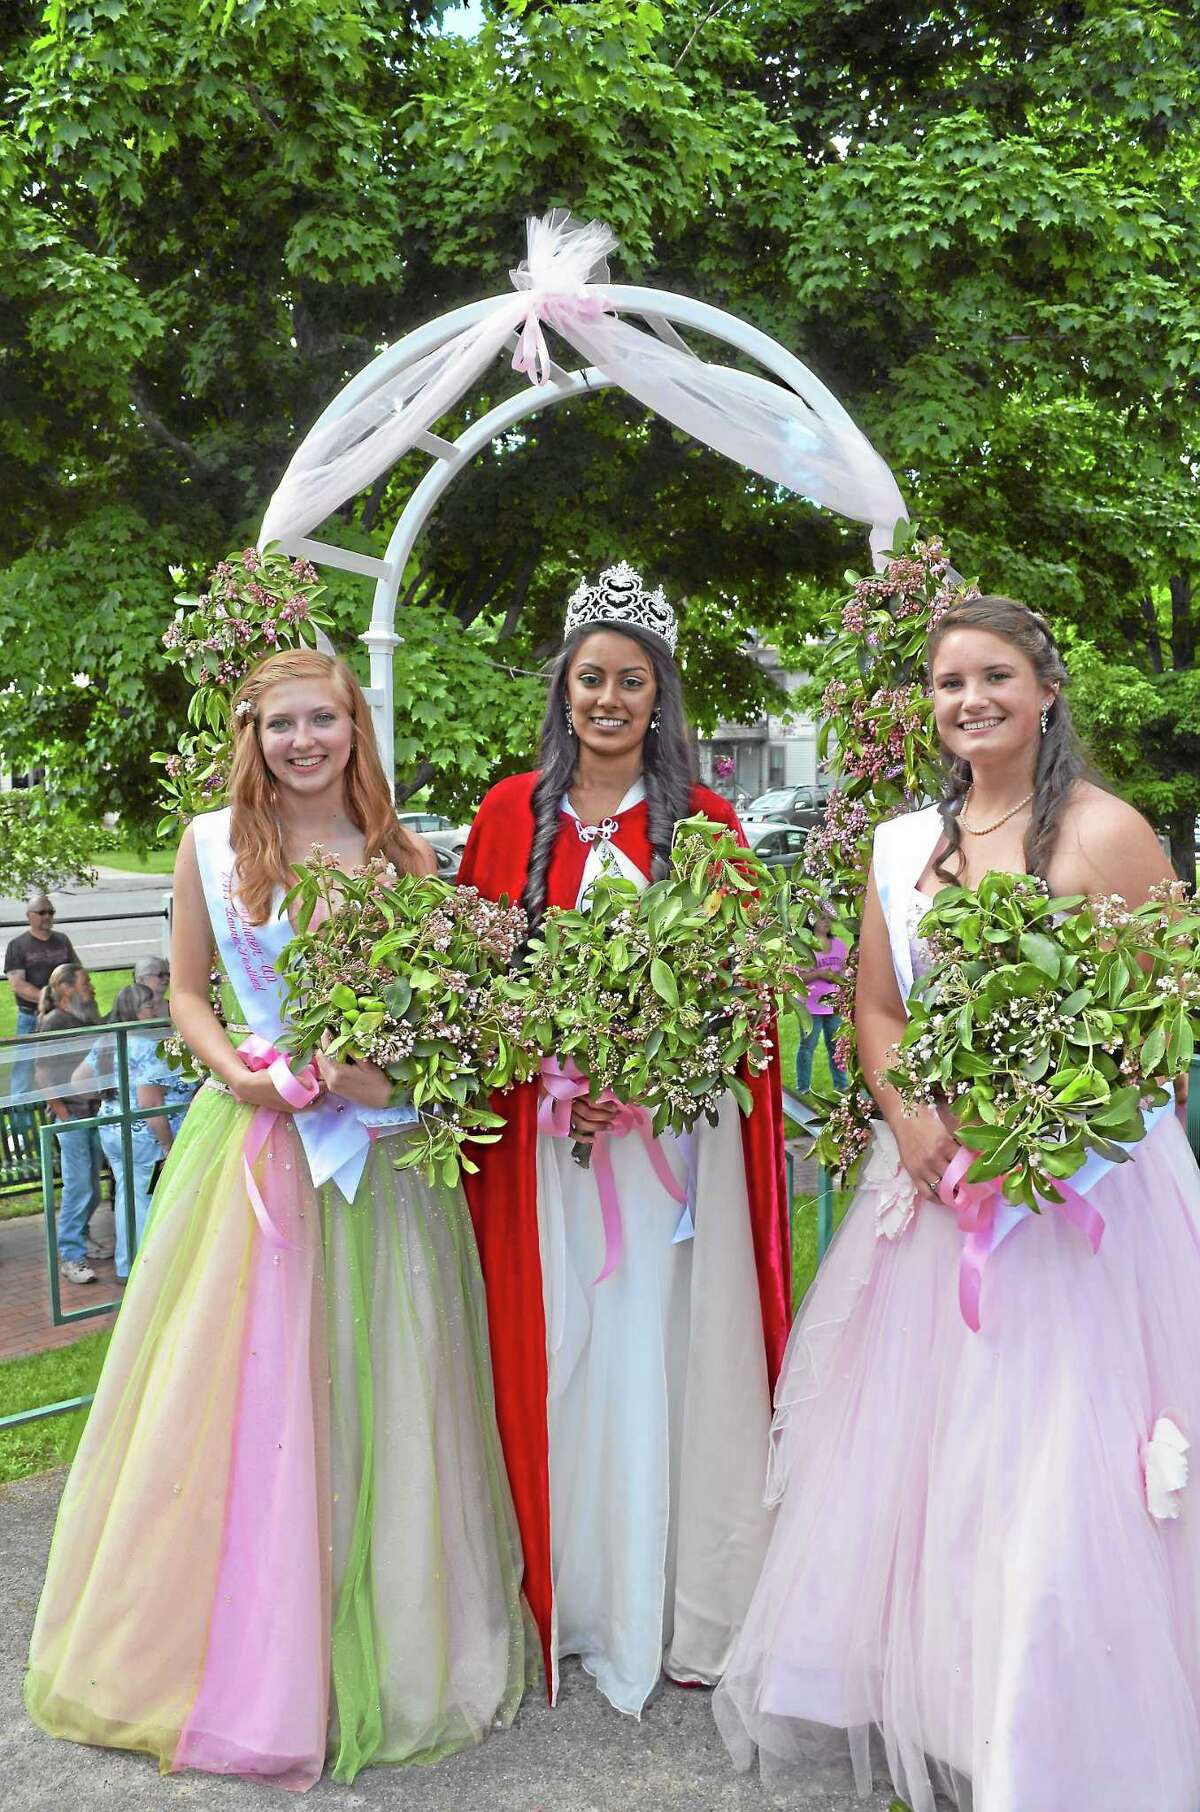 Devisha Patel, 2013 Laurel Queen, Emily Owens, first runner up, and Mackenzie Russo, second runner up, were crowned at the 79th annual Laurel Festival.